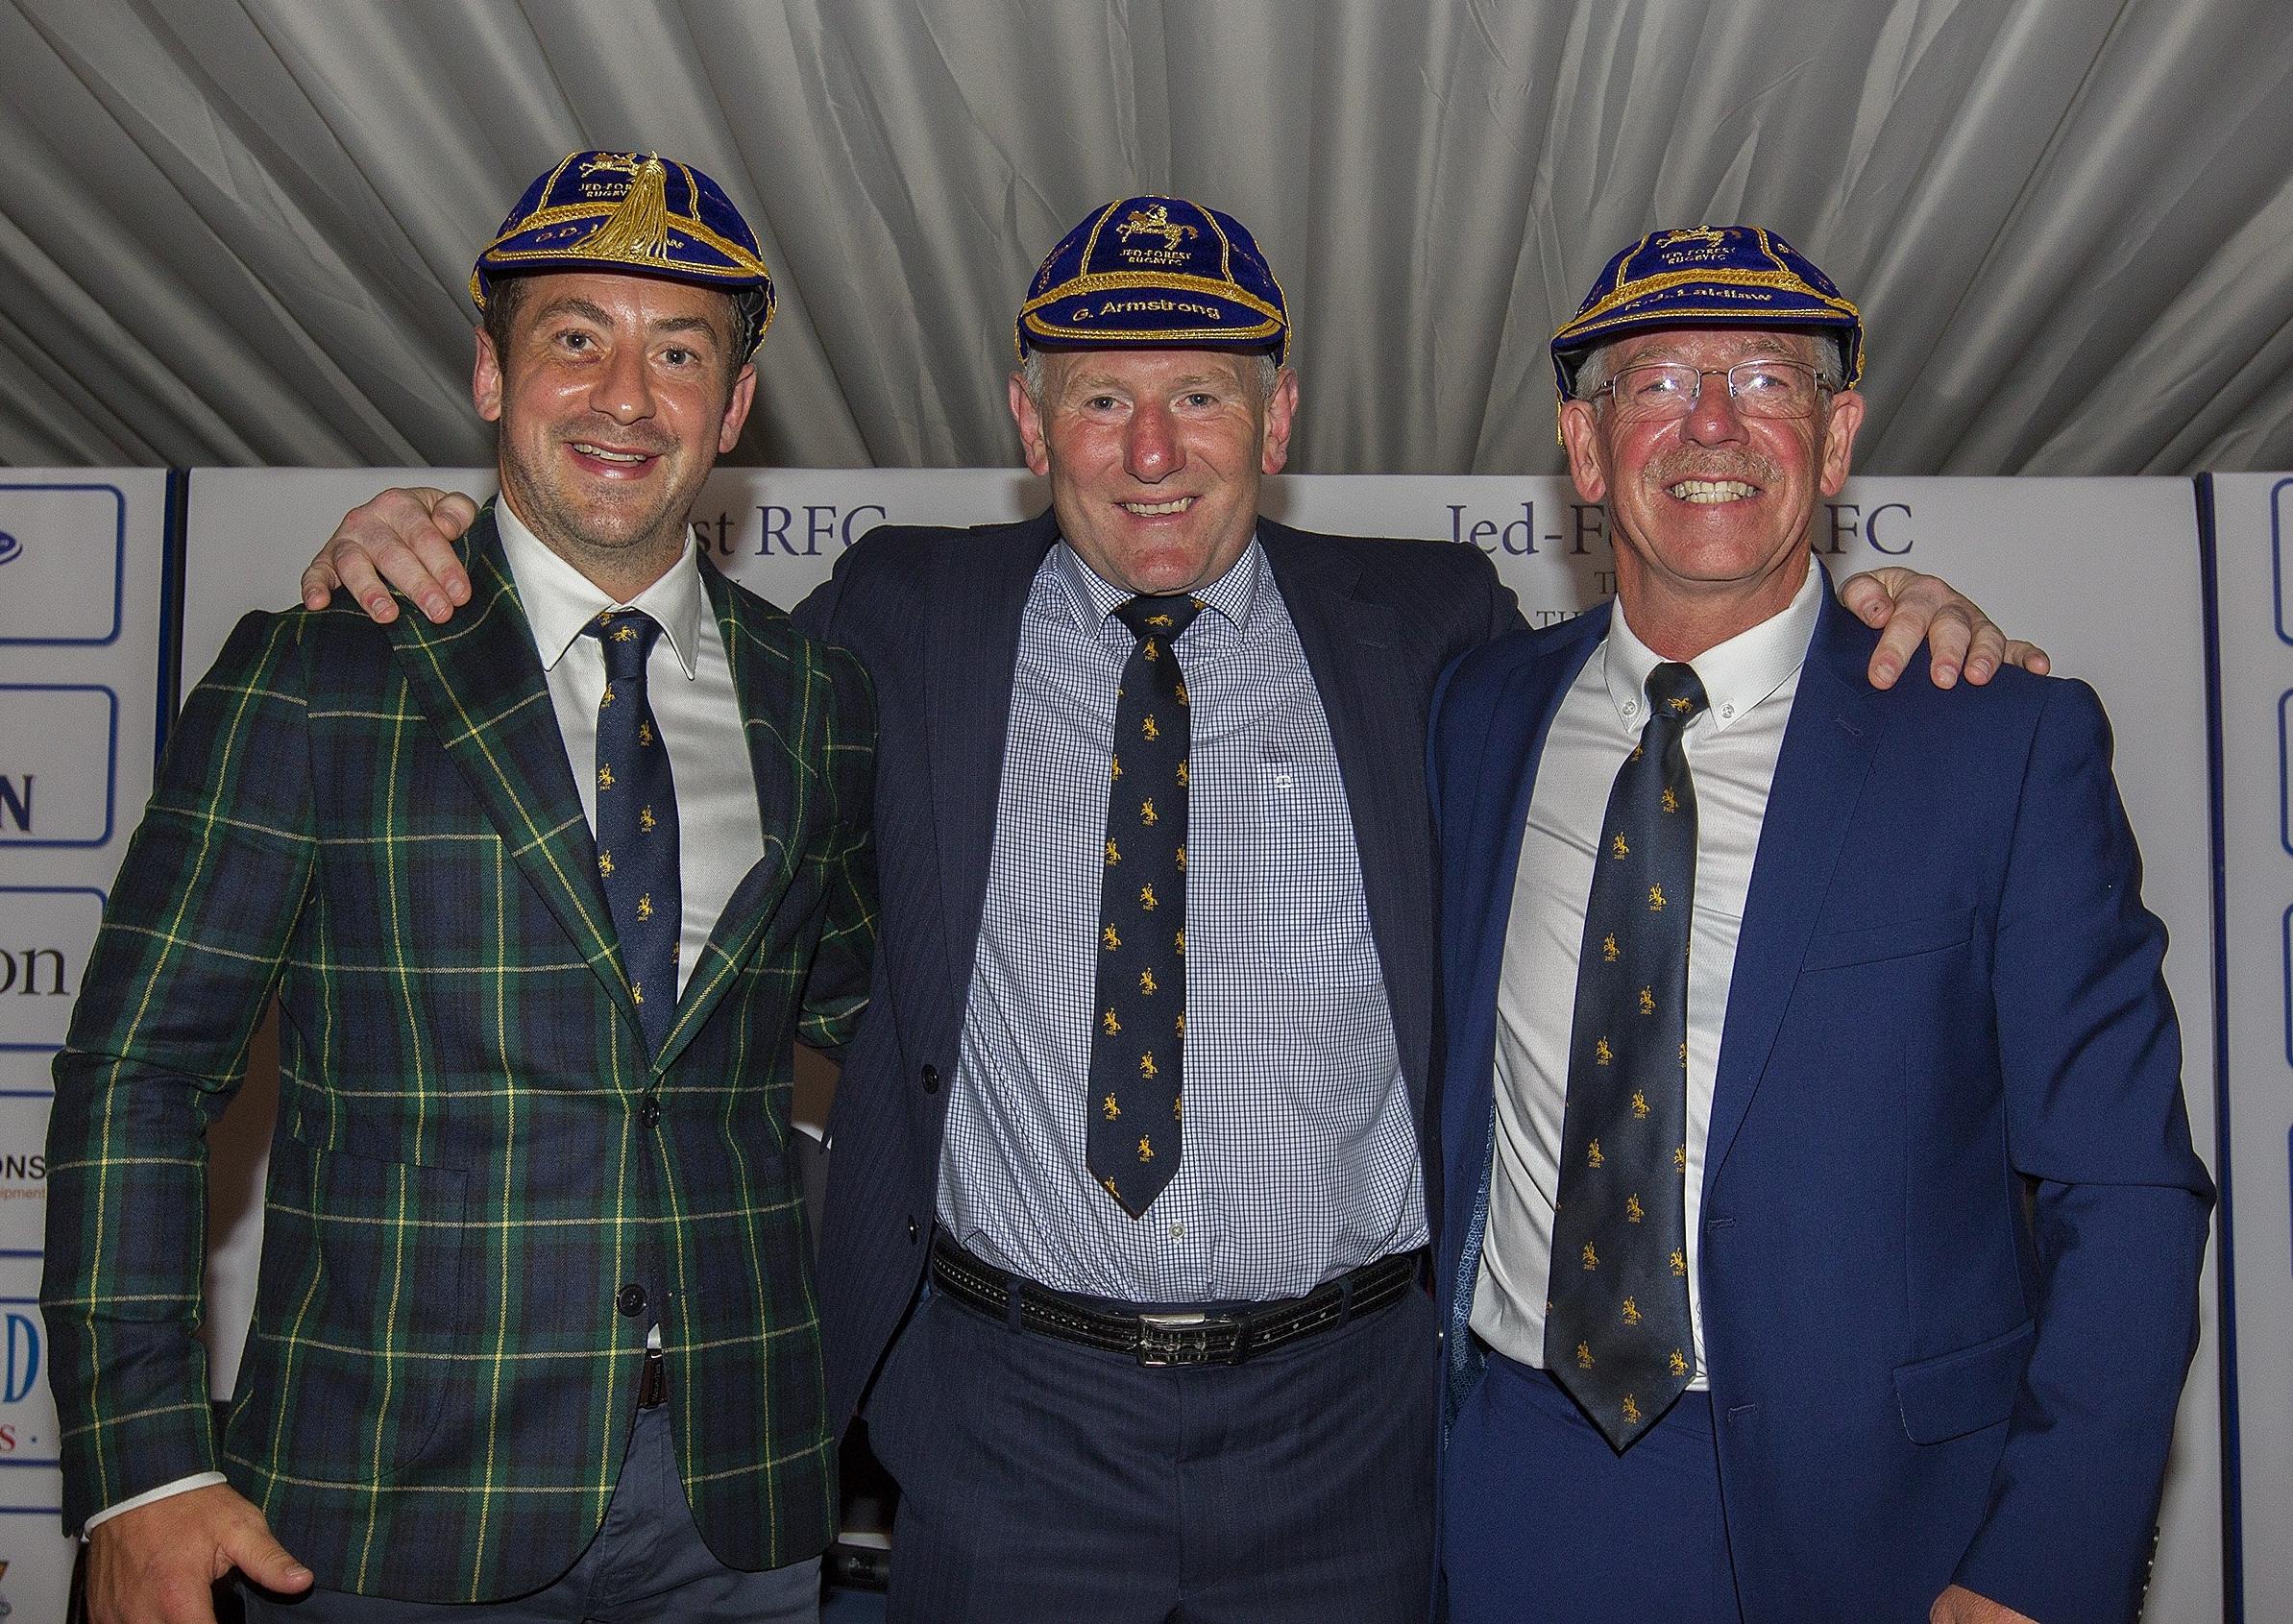 Greig Laidlaw, Gary Armstrong and Roy Laidlaw at Jedforest RFC's Three 9s dinner in August 2019.